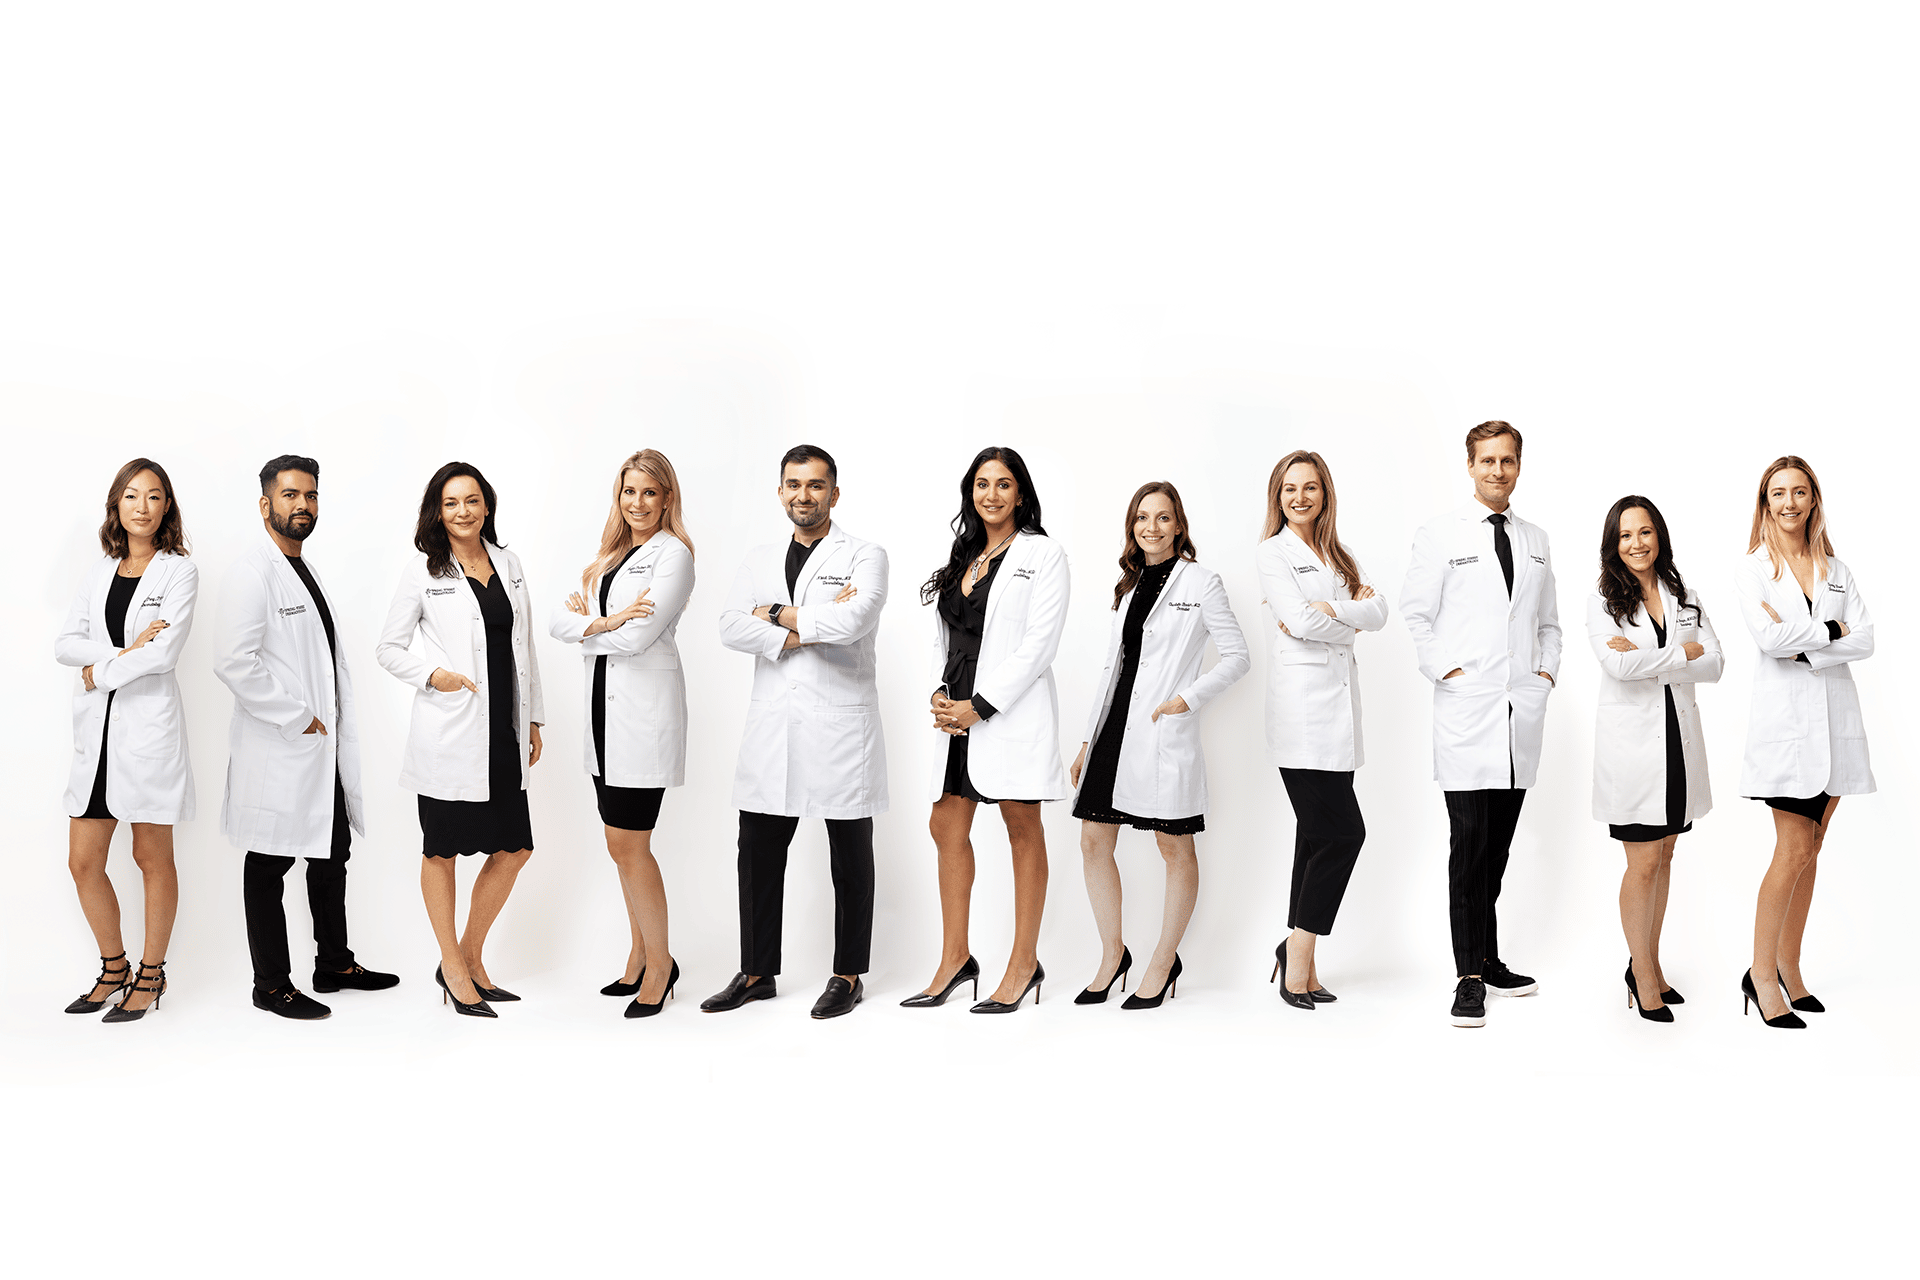 the entire staff at Spring Street Dermatology in NY, NY